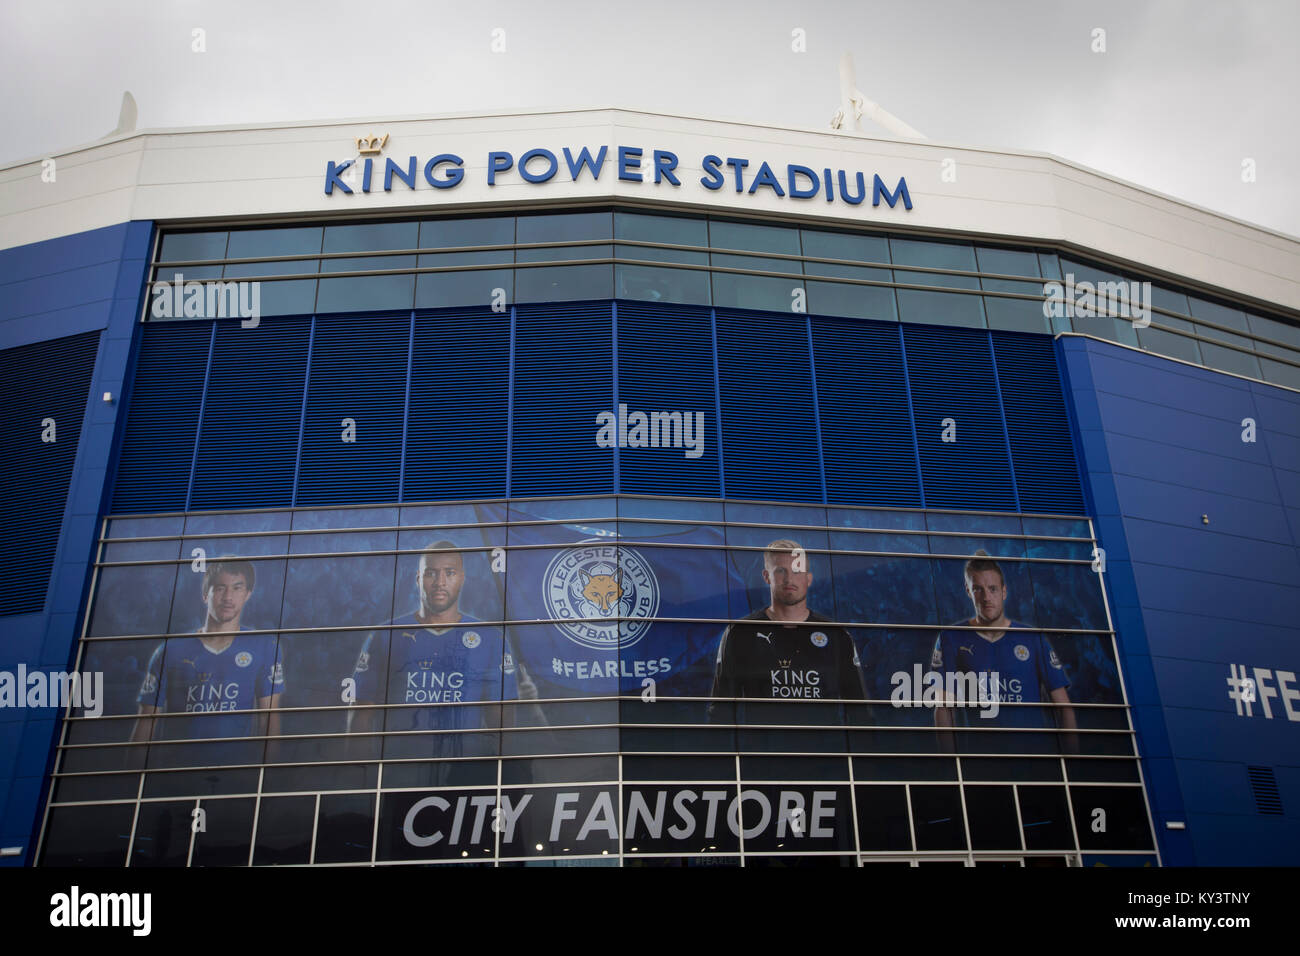 The King Power Stadium, pictured before Leicester City hosted Swansea City in an English Premier League fixture. in the English city of Leicester. Leicester City FC were on the brink of being surprise winners of the English Premier League in the 2015-16 season. On that day, they defeated their visitors by fours goals to nil to open up and eight point lead at the top of the table. Stock Photo